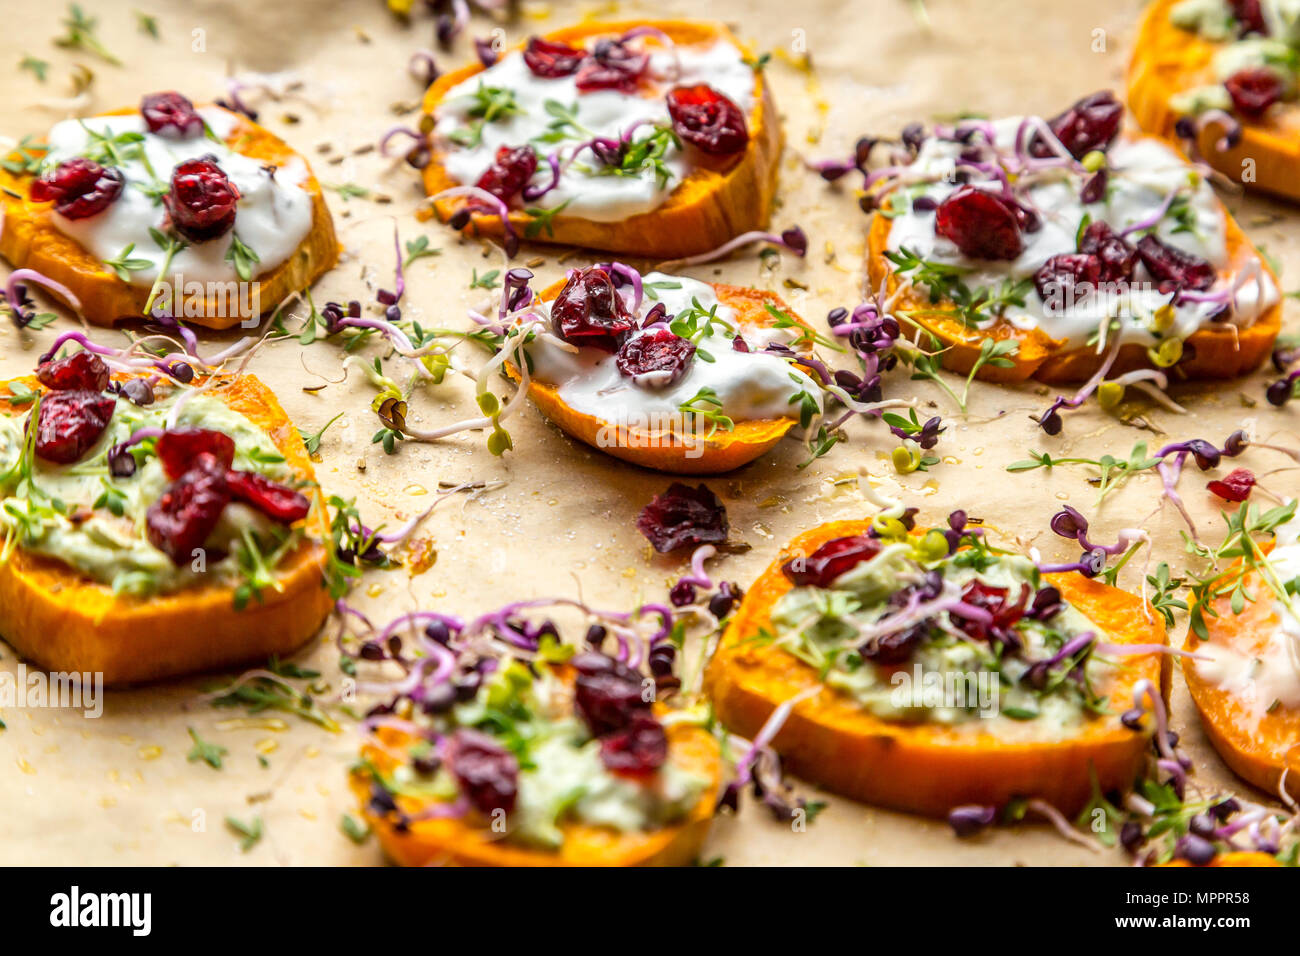 Slices of sweet potato with cream cheese, ramson cream, goat cheese, cress and cranberries Stock Photo